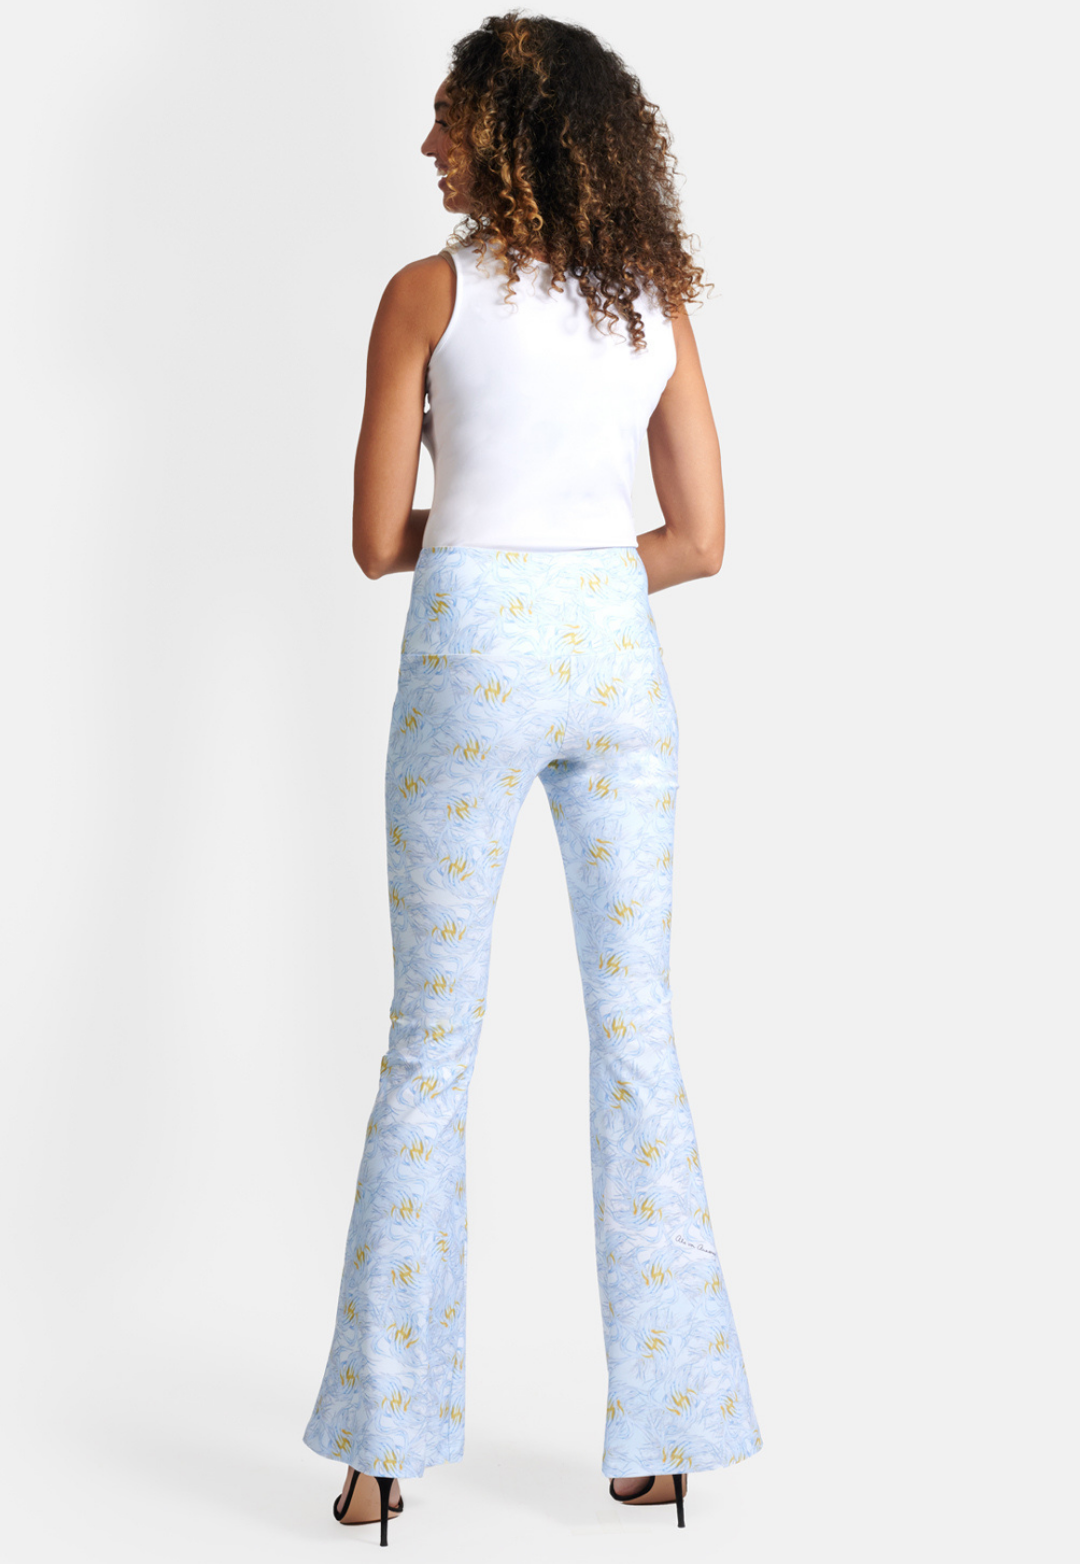 Woman wearing blue and yellow feather printed stretch knit pants with white stretch knit tank top by Ala von Auersperg